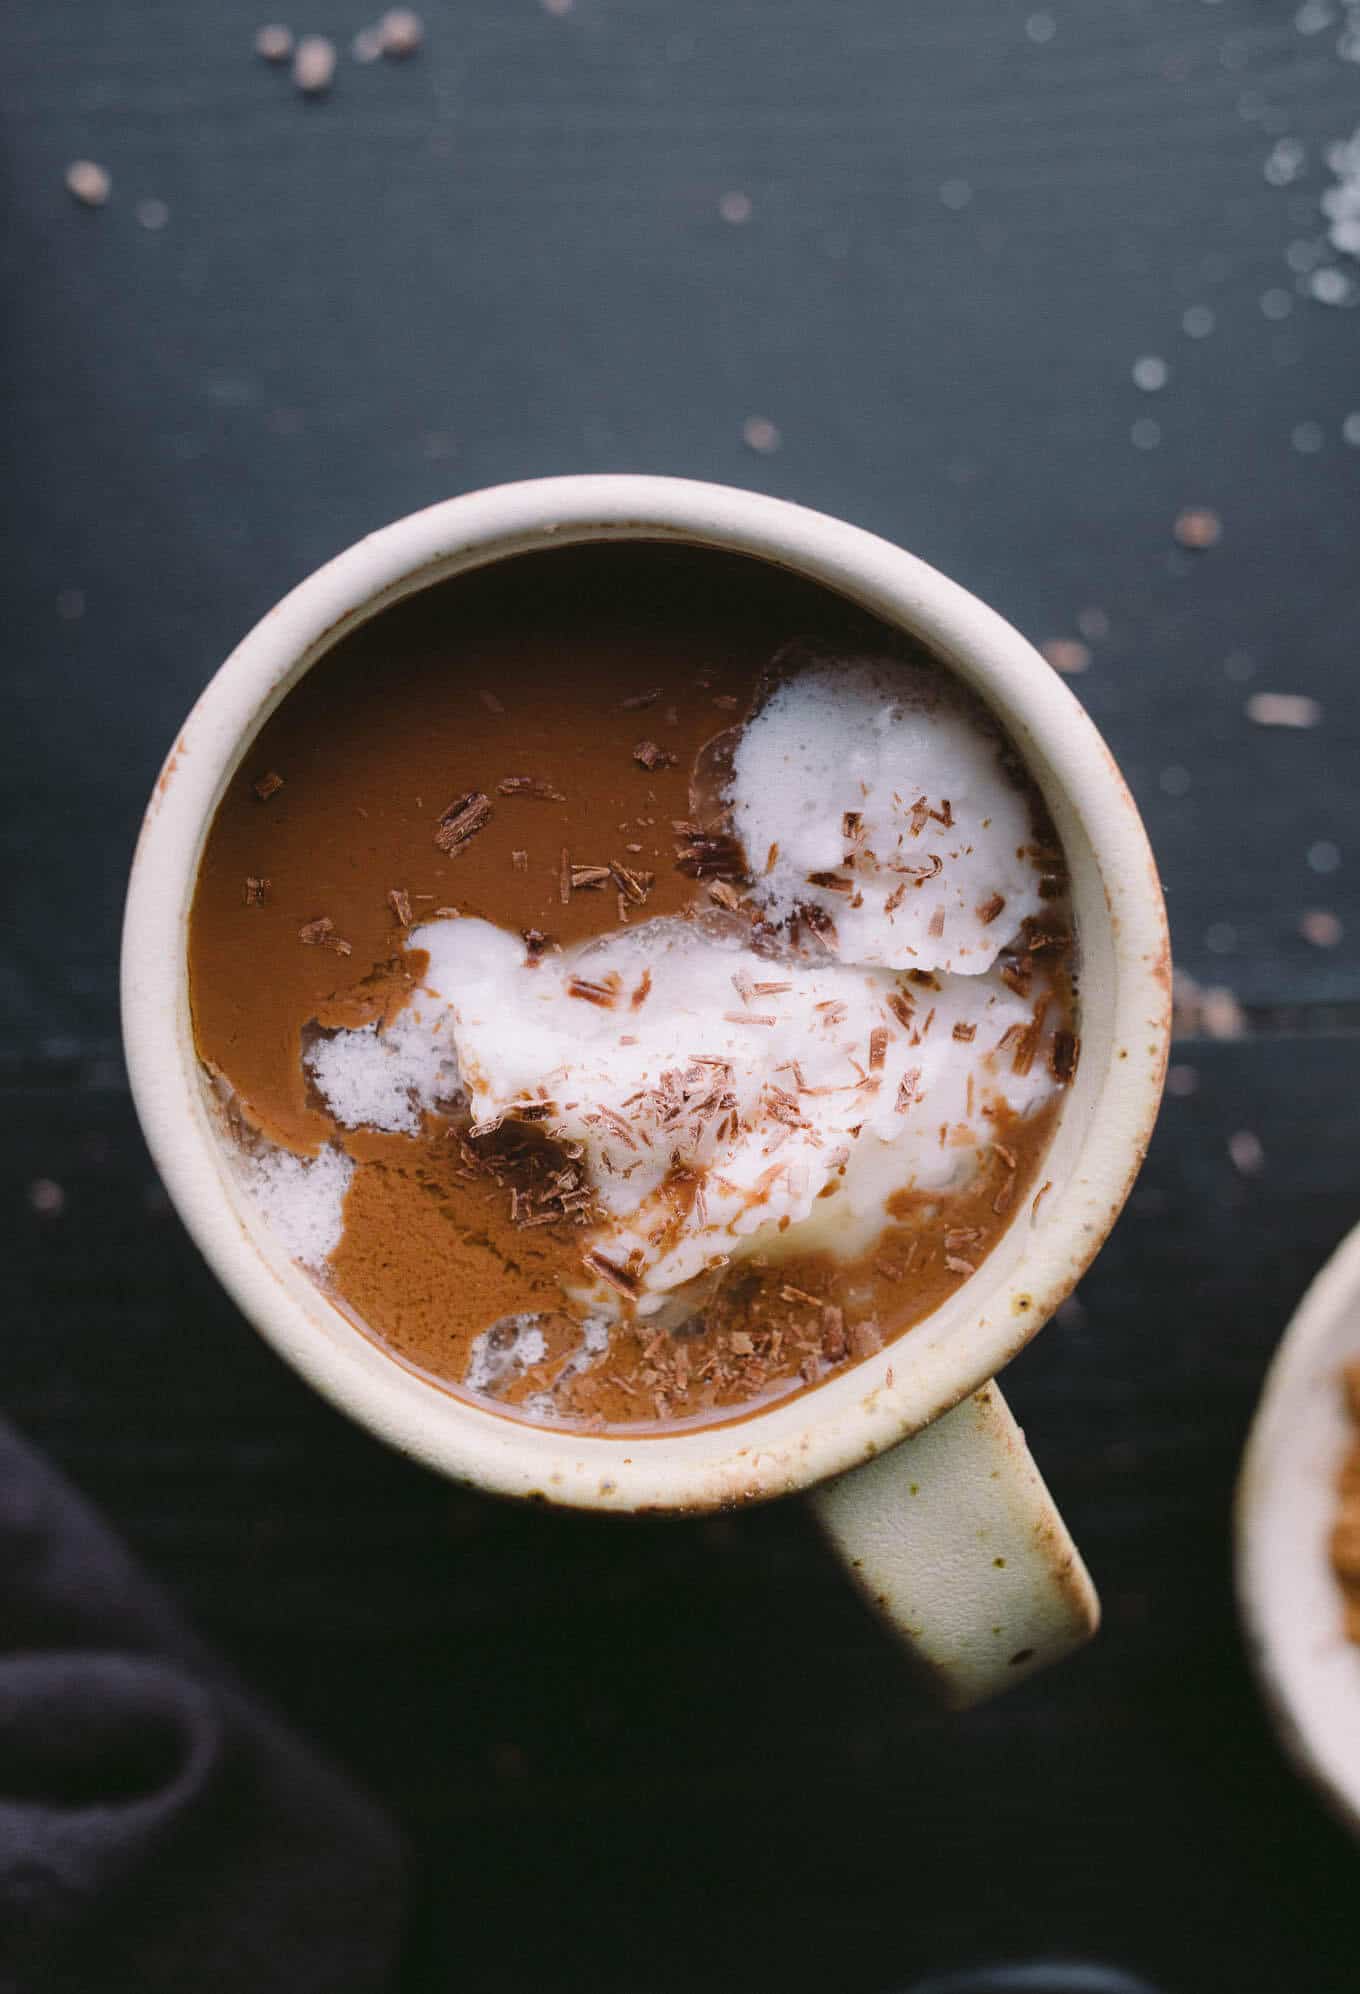 Hot cocoa in a mug topped with coconut cream and chocolate shavings.